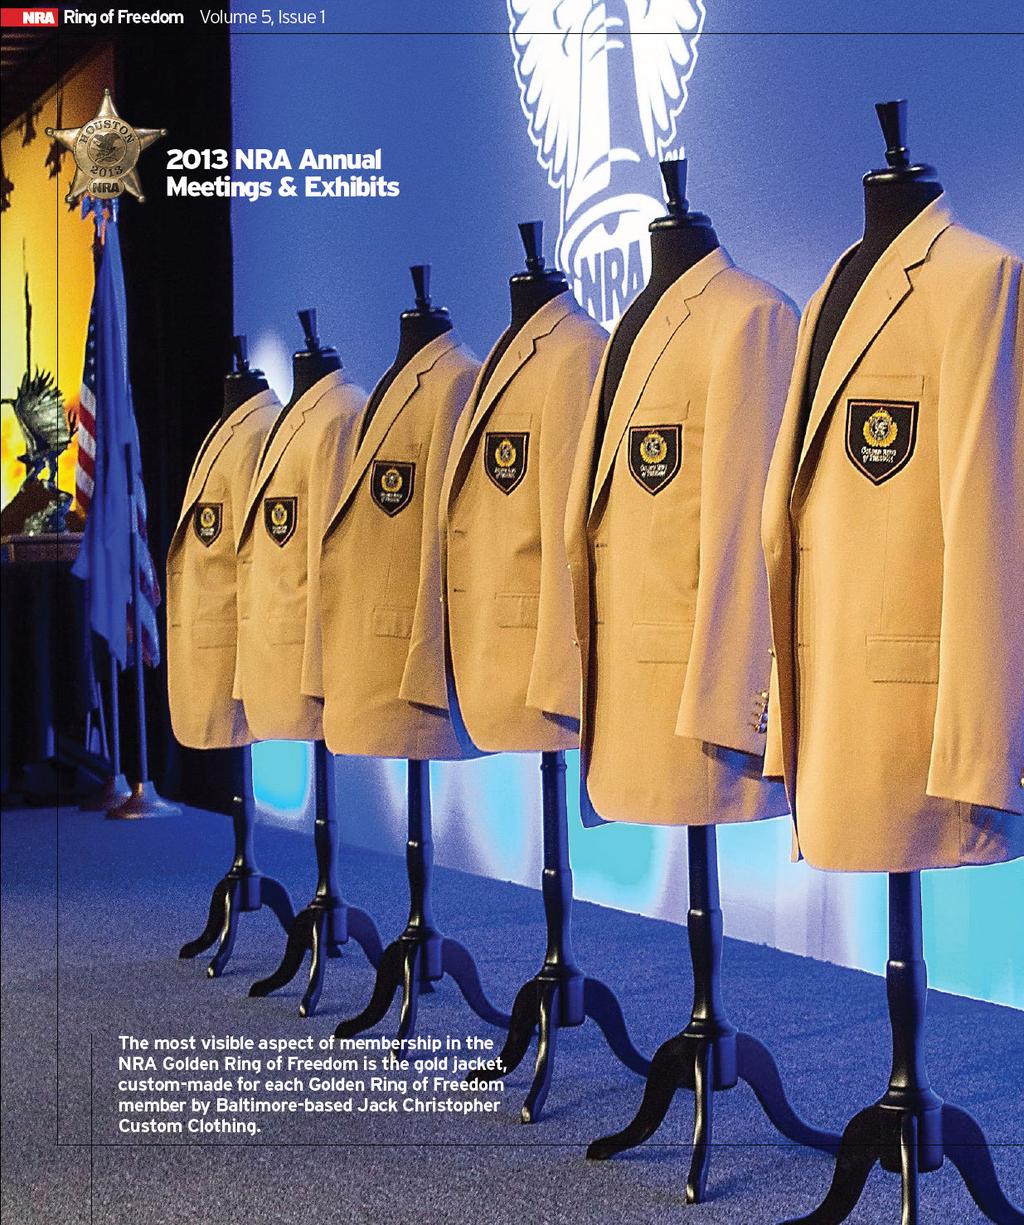 Golden jackets are presented to donors who